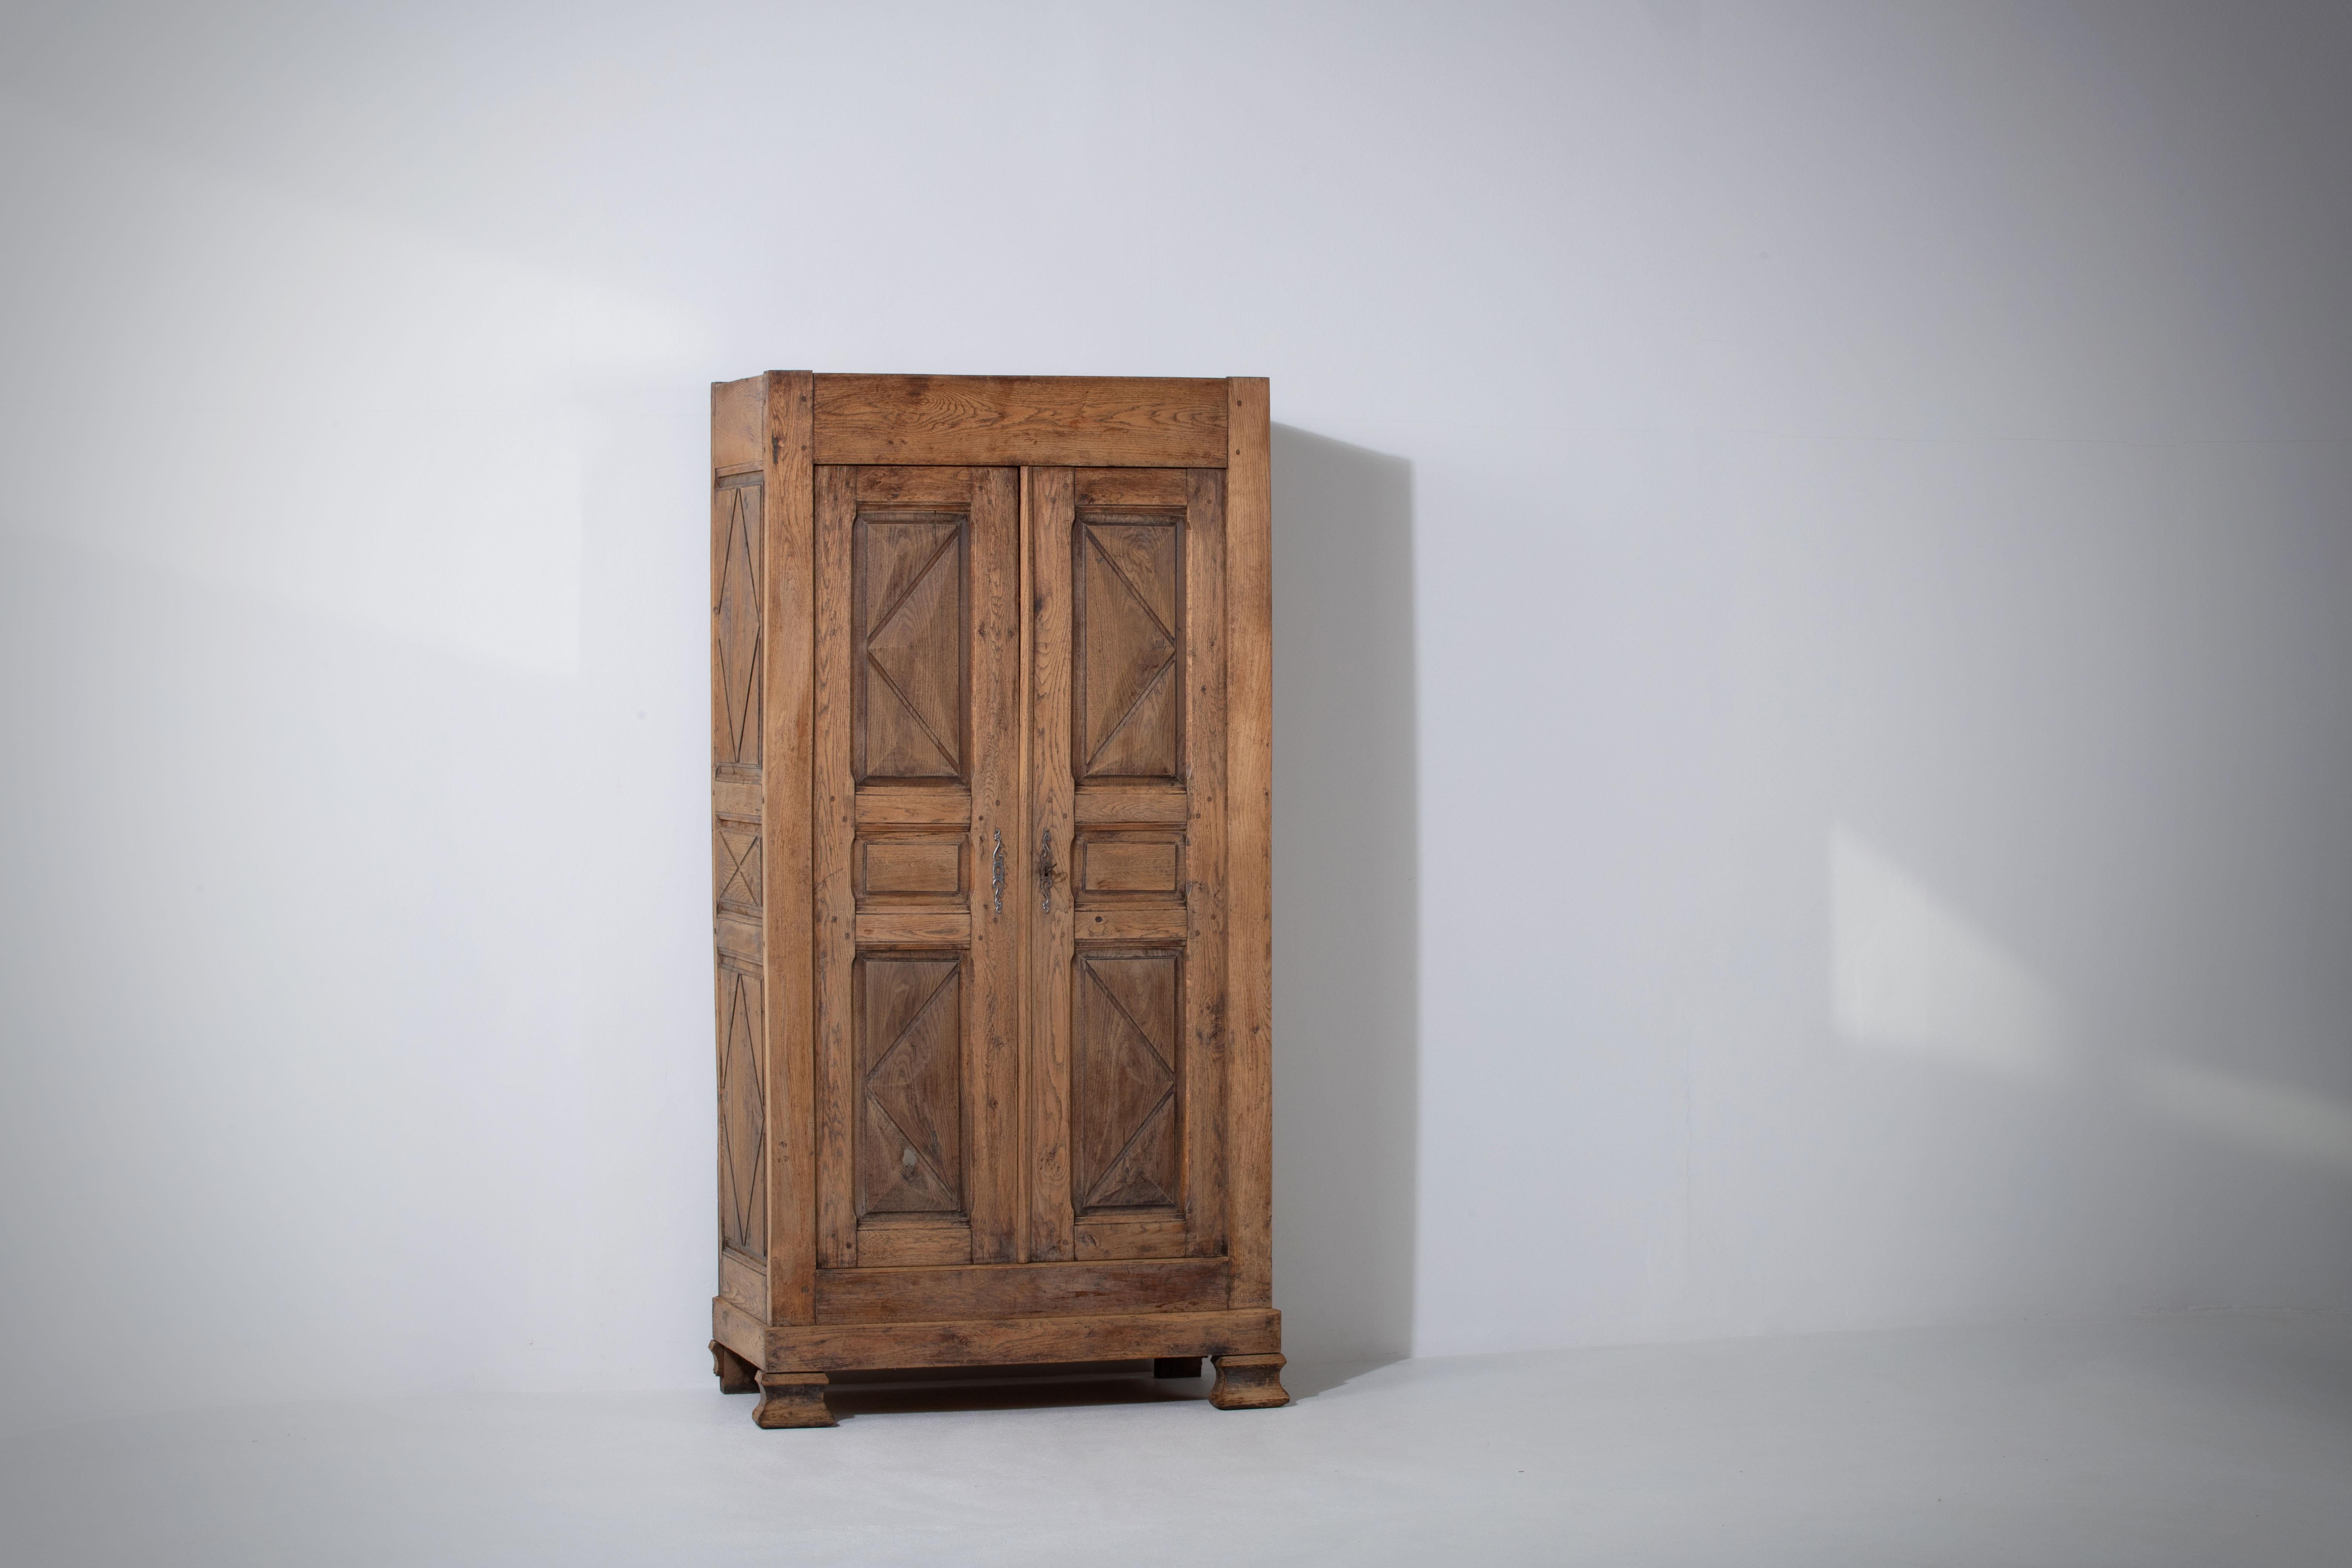 Armoire in solid oak, France, late 19th century.